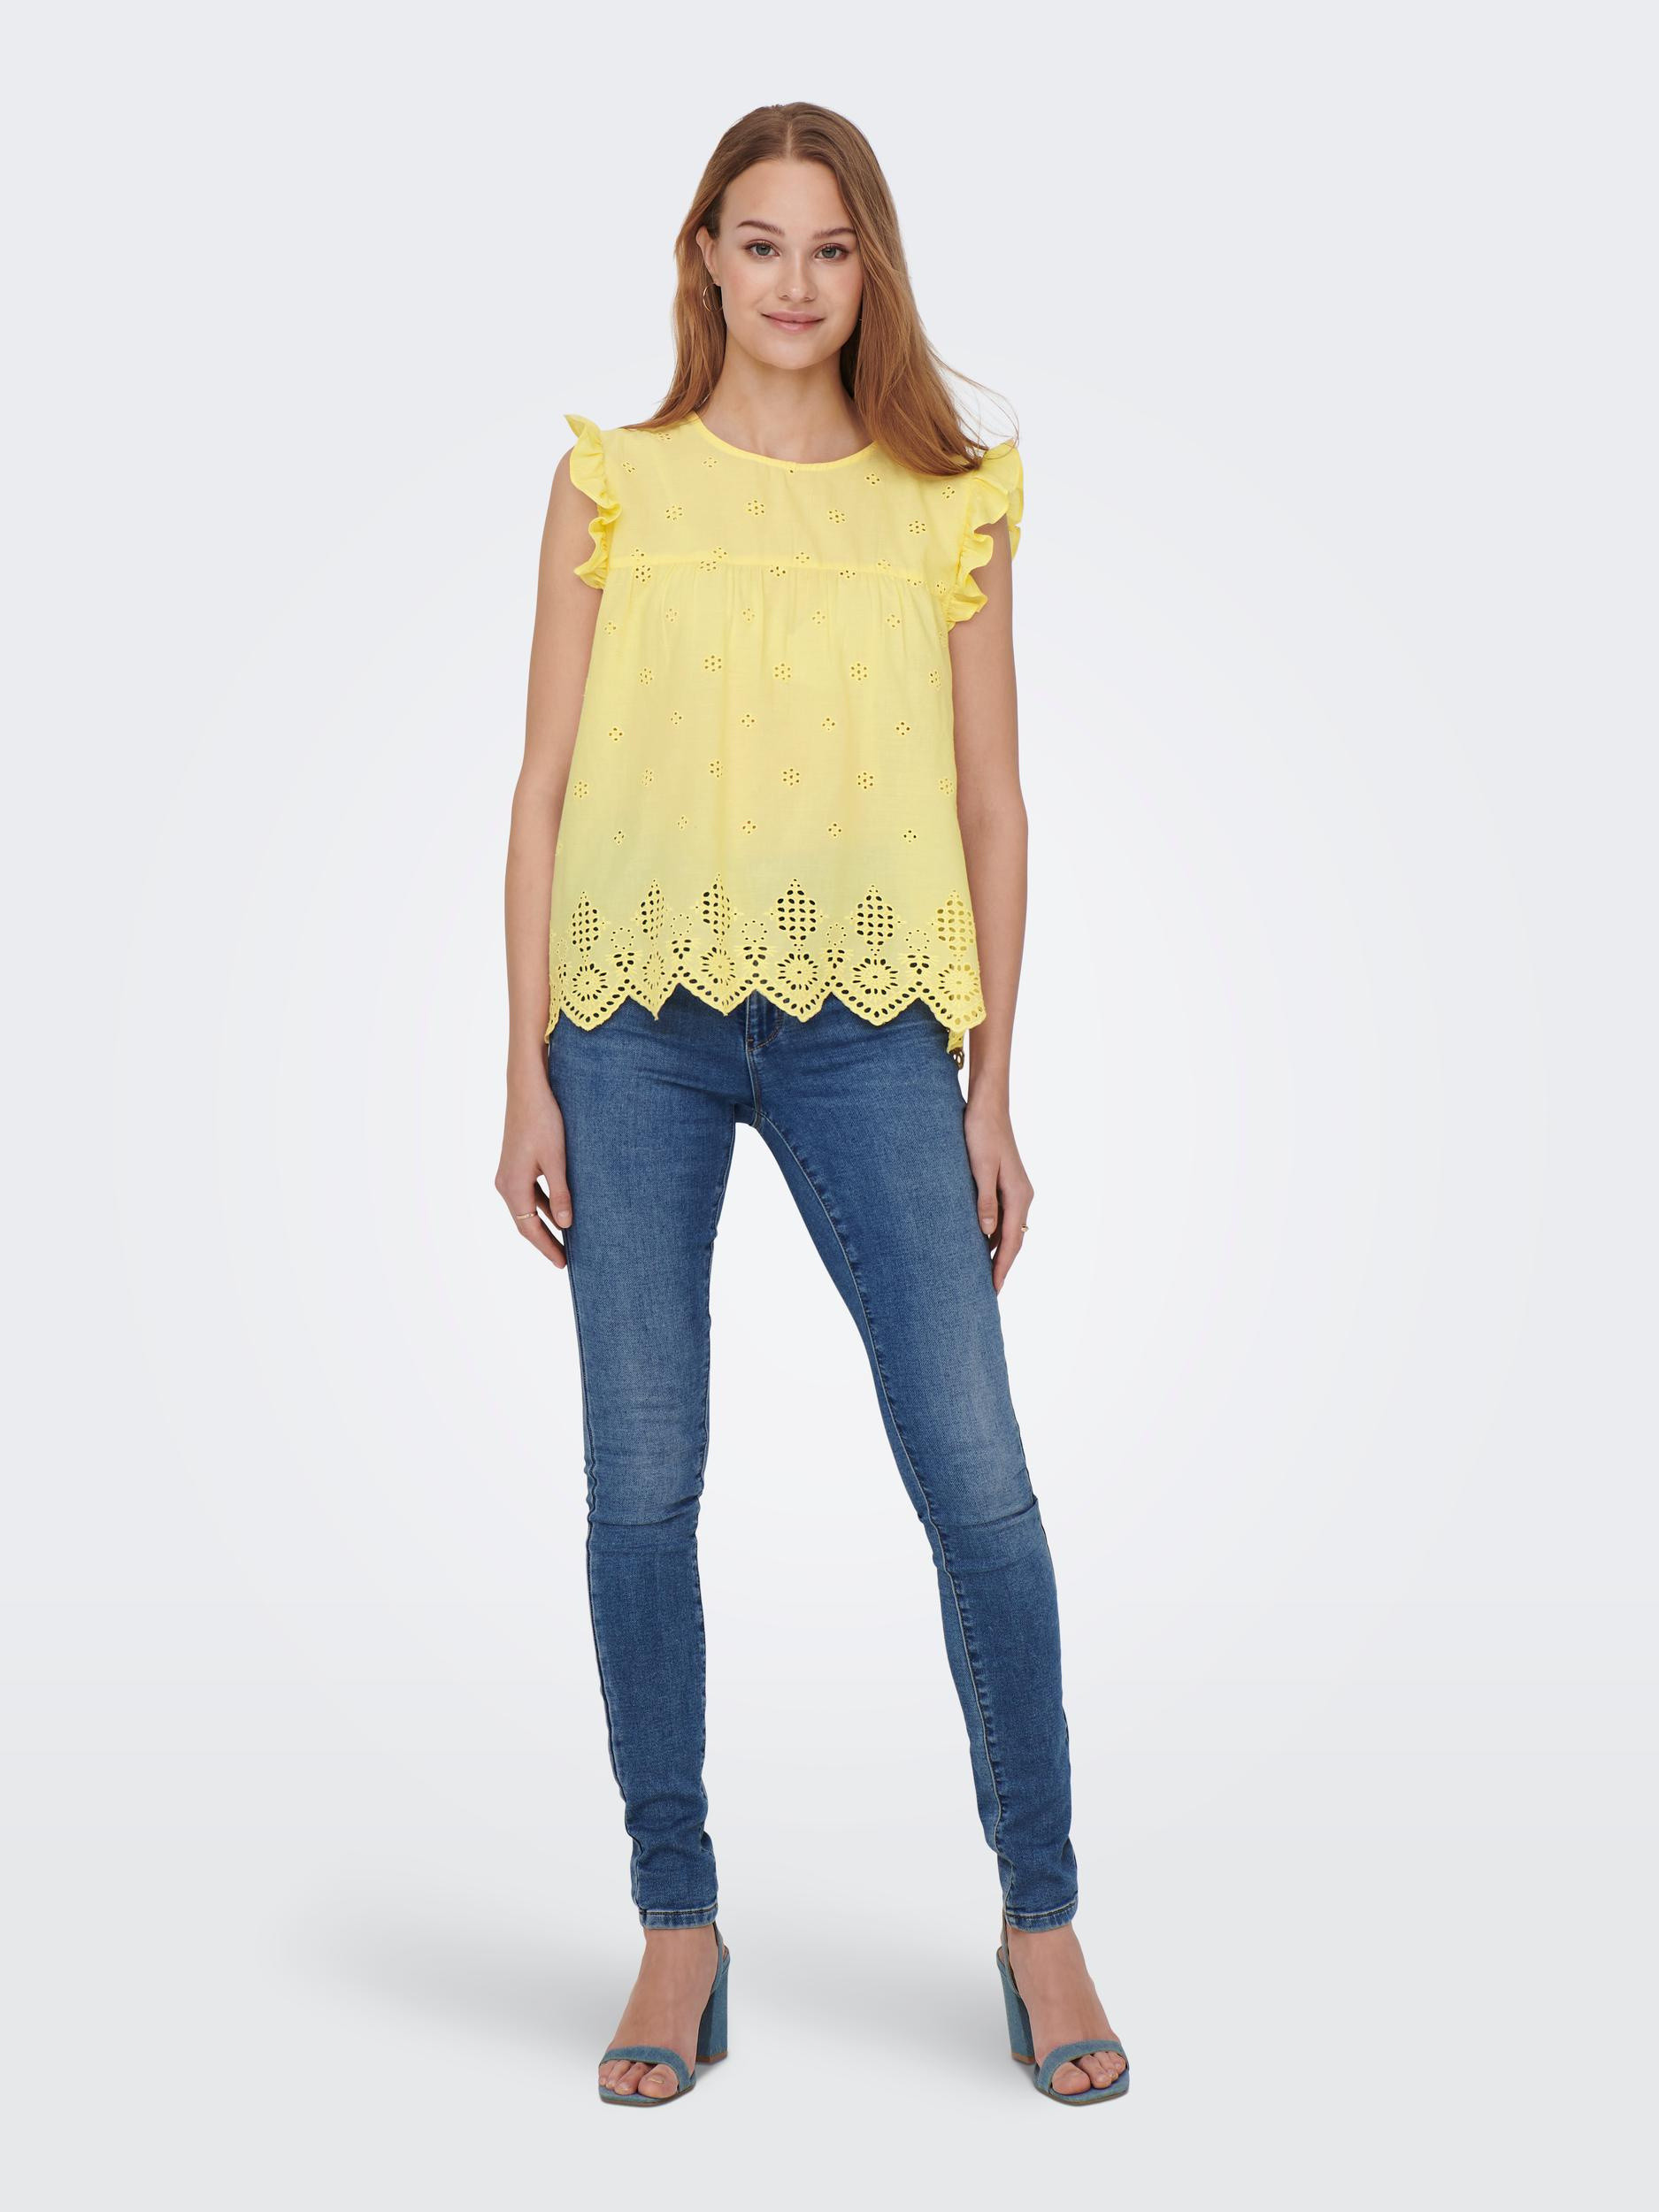 Only - Cotton top, Yellow, large image number 4